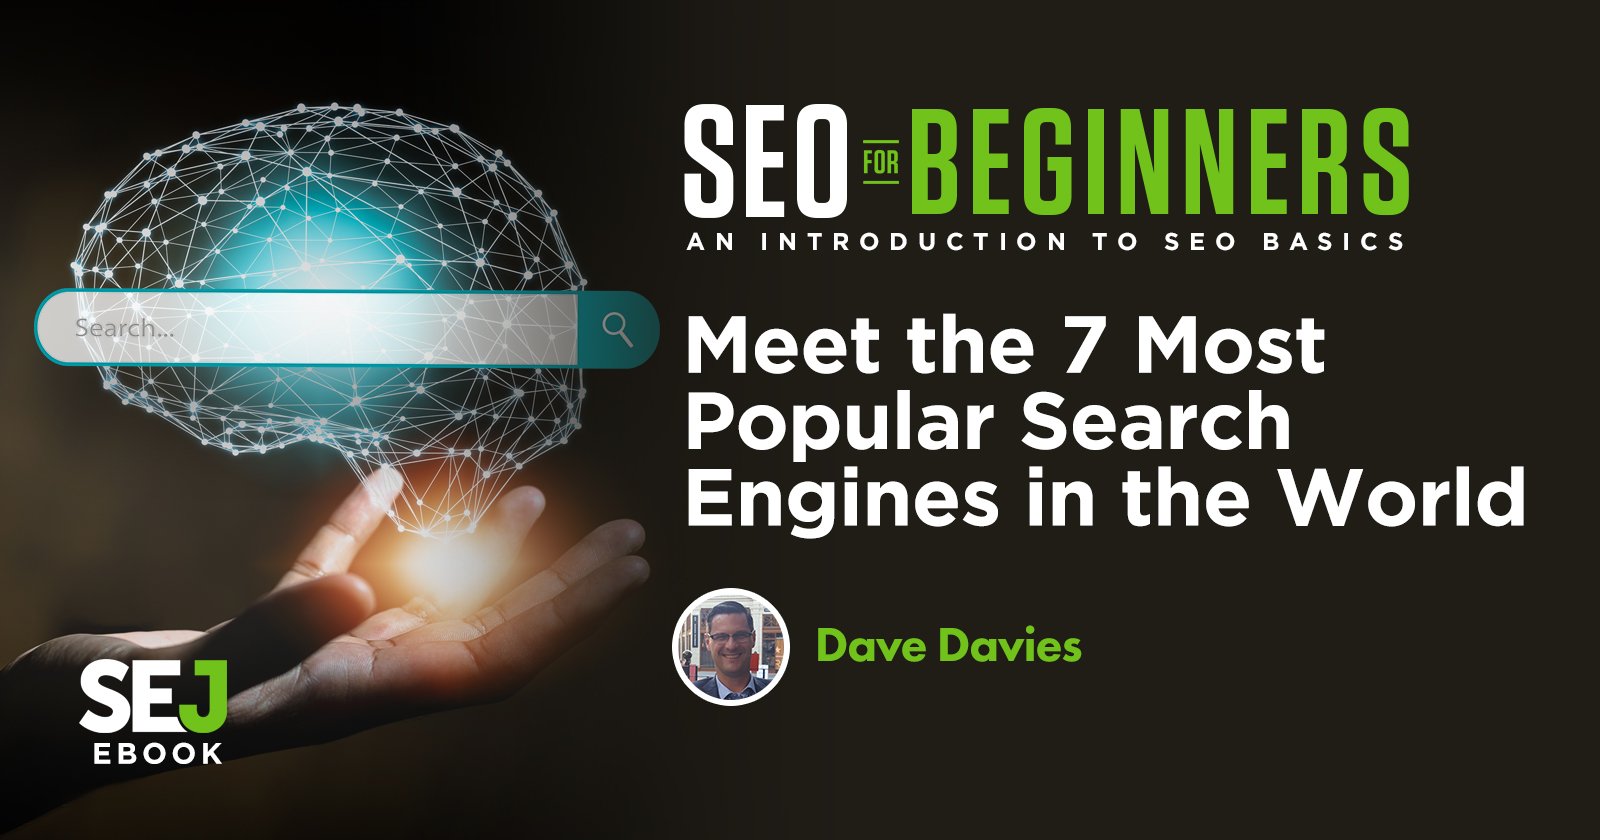 , Meet the 7 Most Popular Search Engines in the World